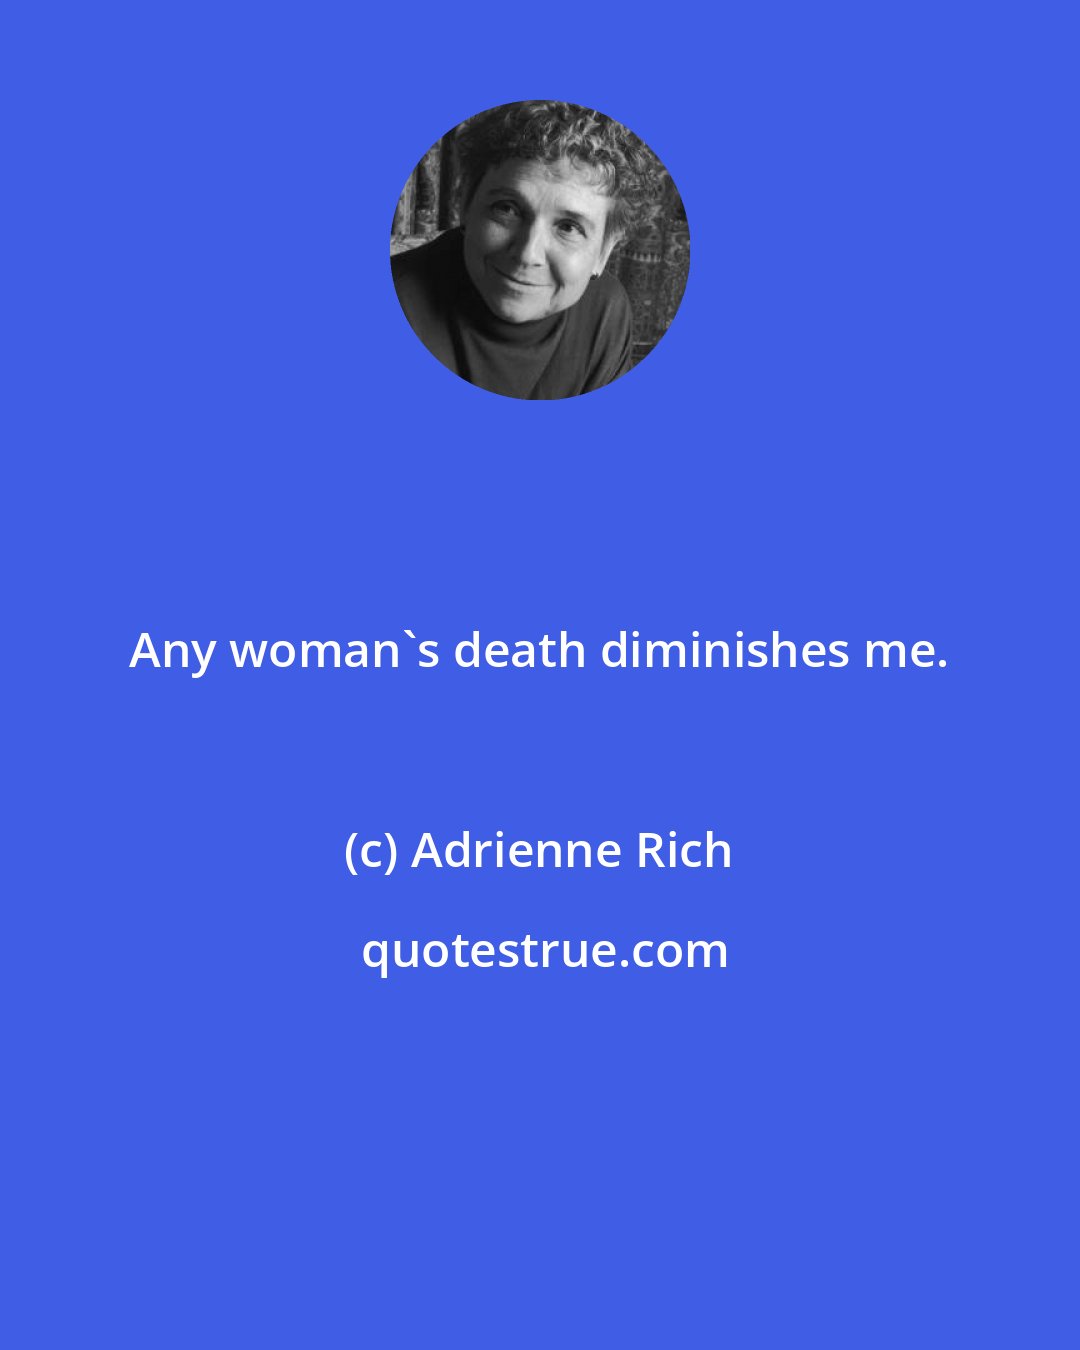 Adrienne Rich: Any woman's death diminishes me.